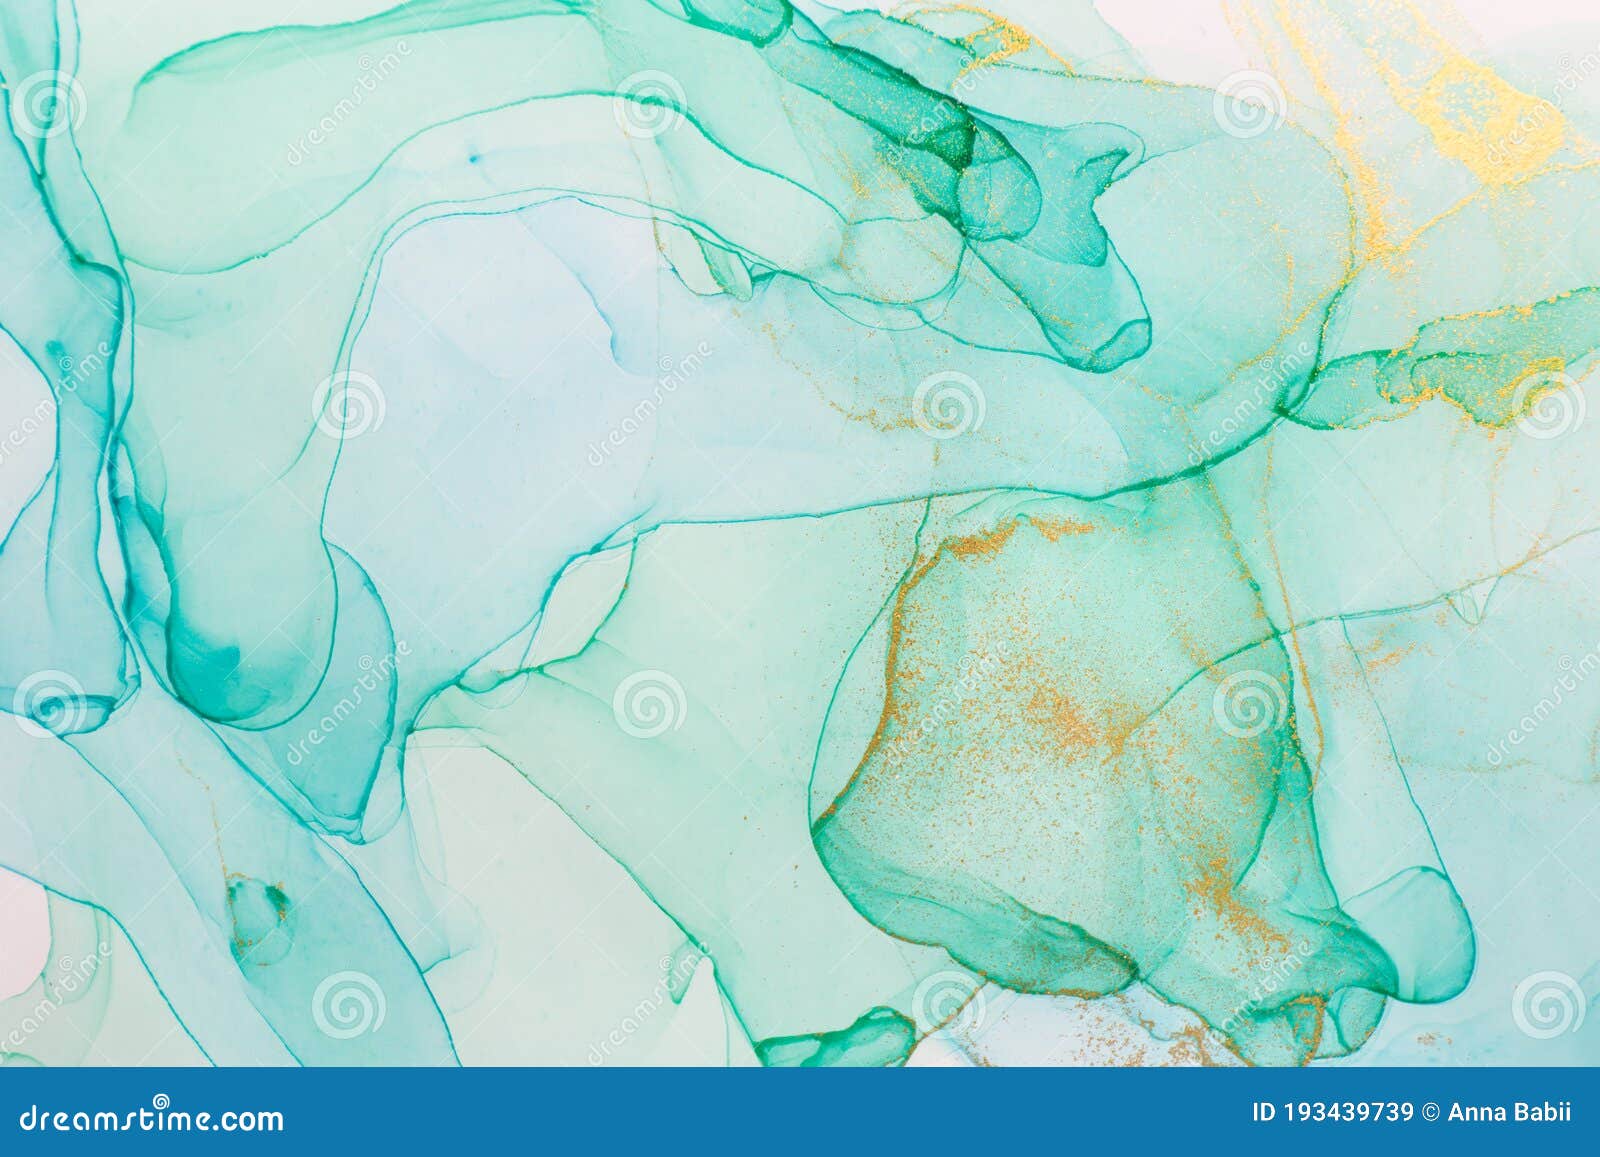 Alcohol Ink Blue and Green Abstract Background. Ocean Style Watercolor ...